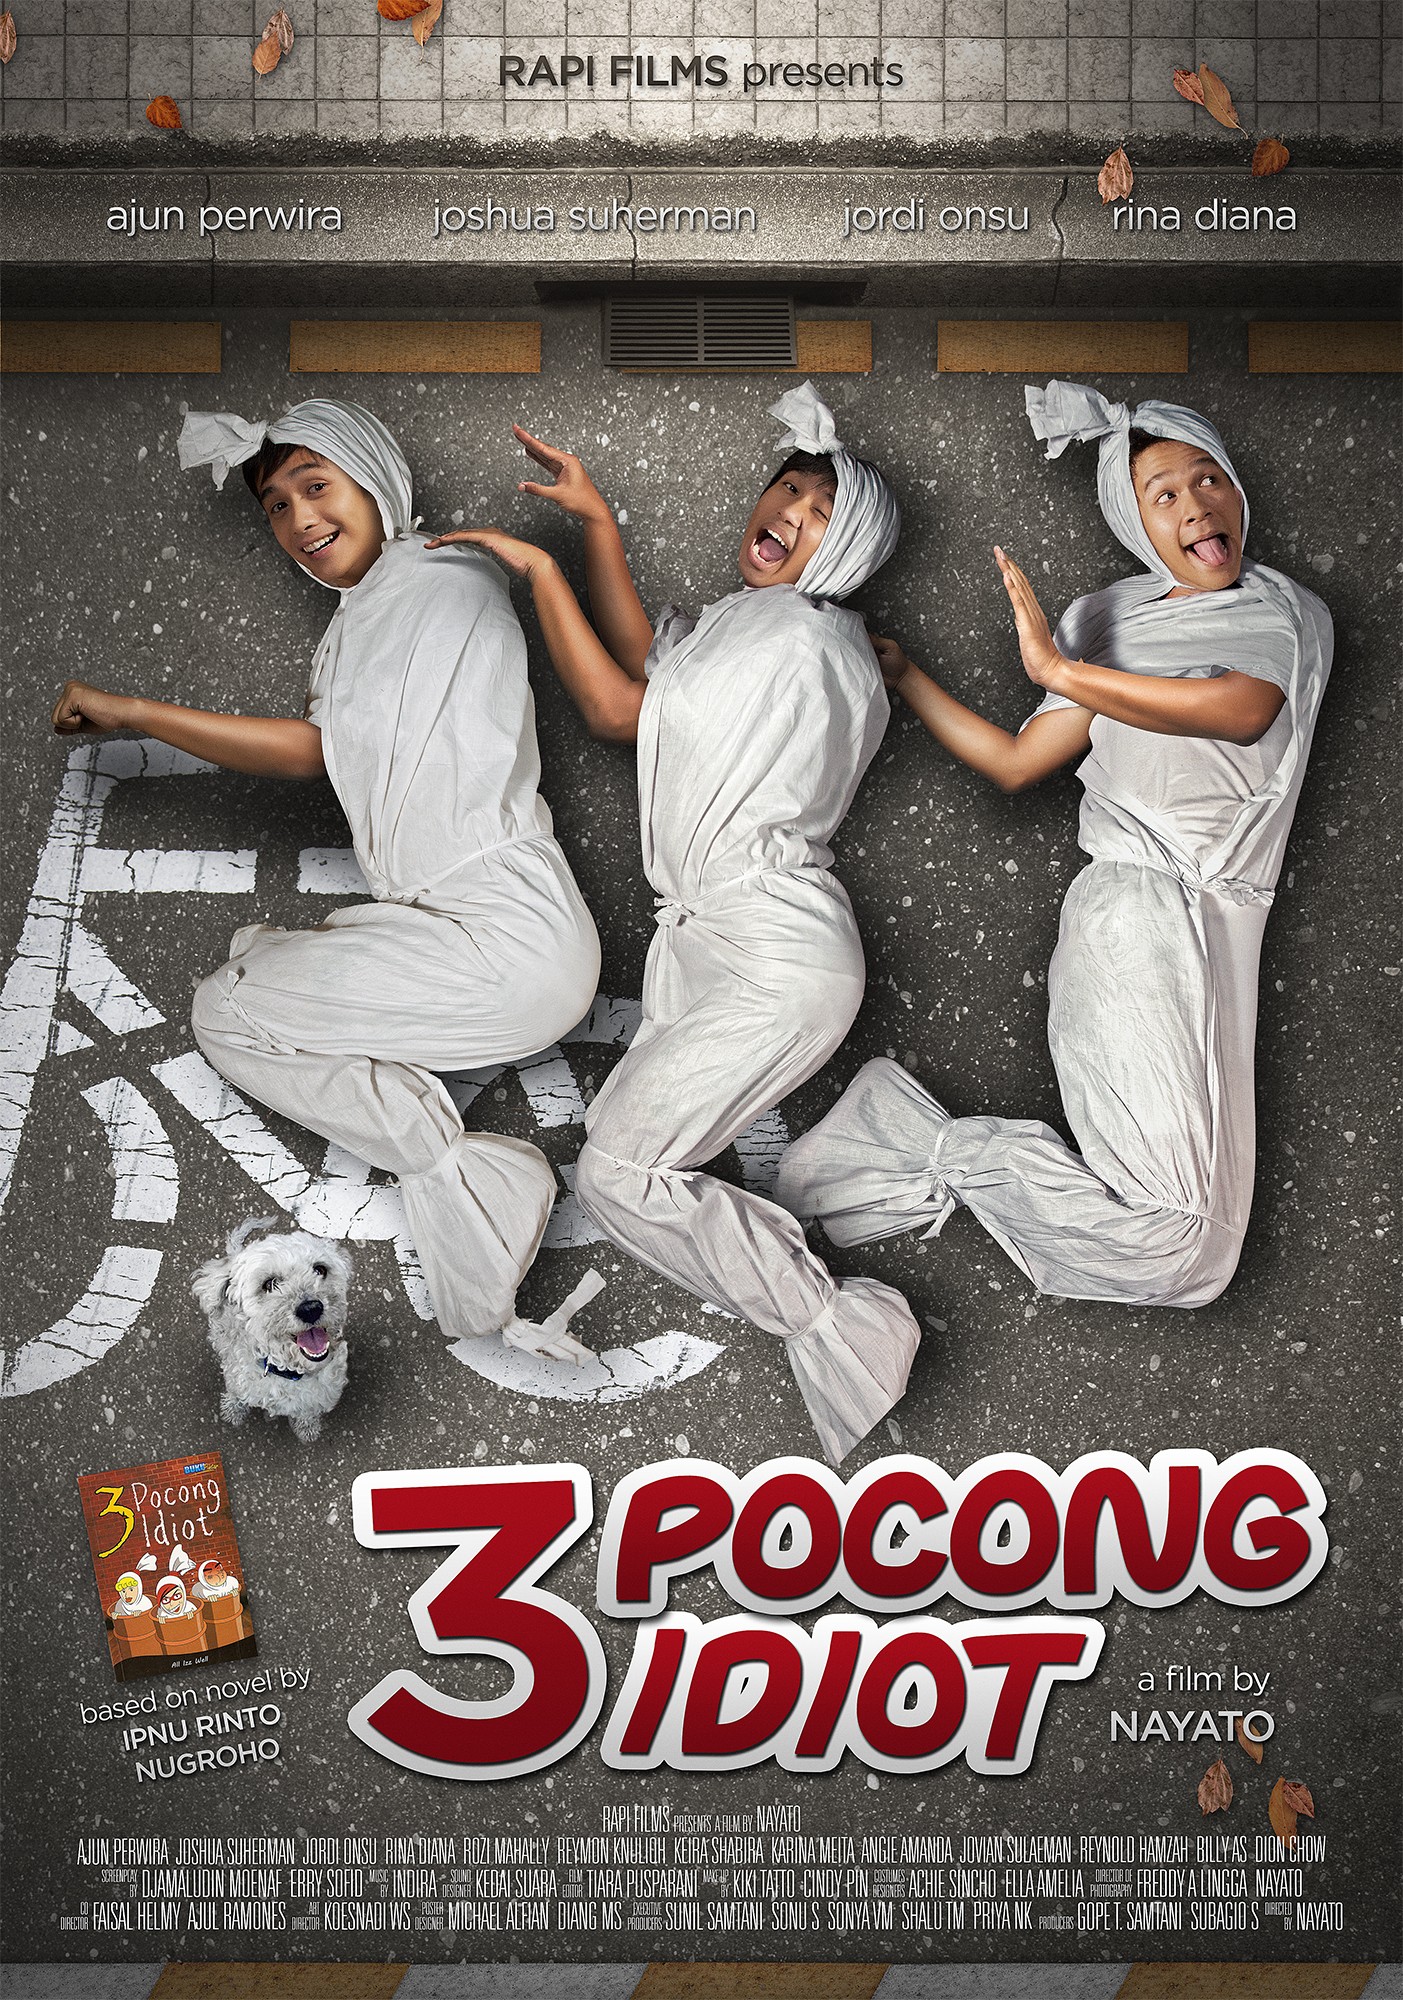 Mega Sized Movie Poster Image for 3 pocong idiot (#1 of 2)